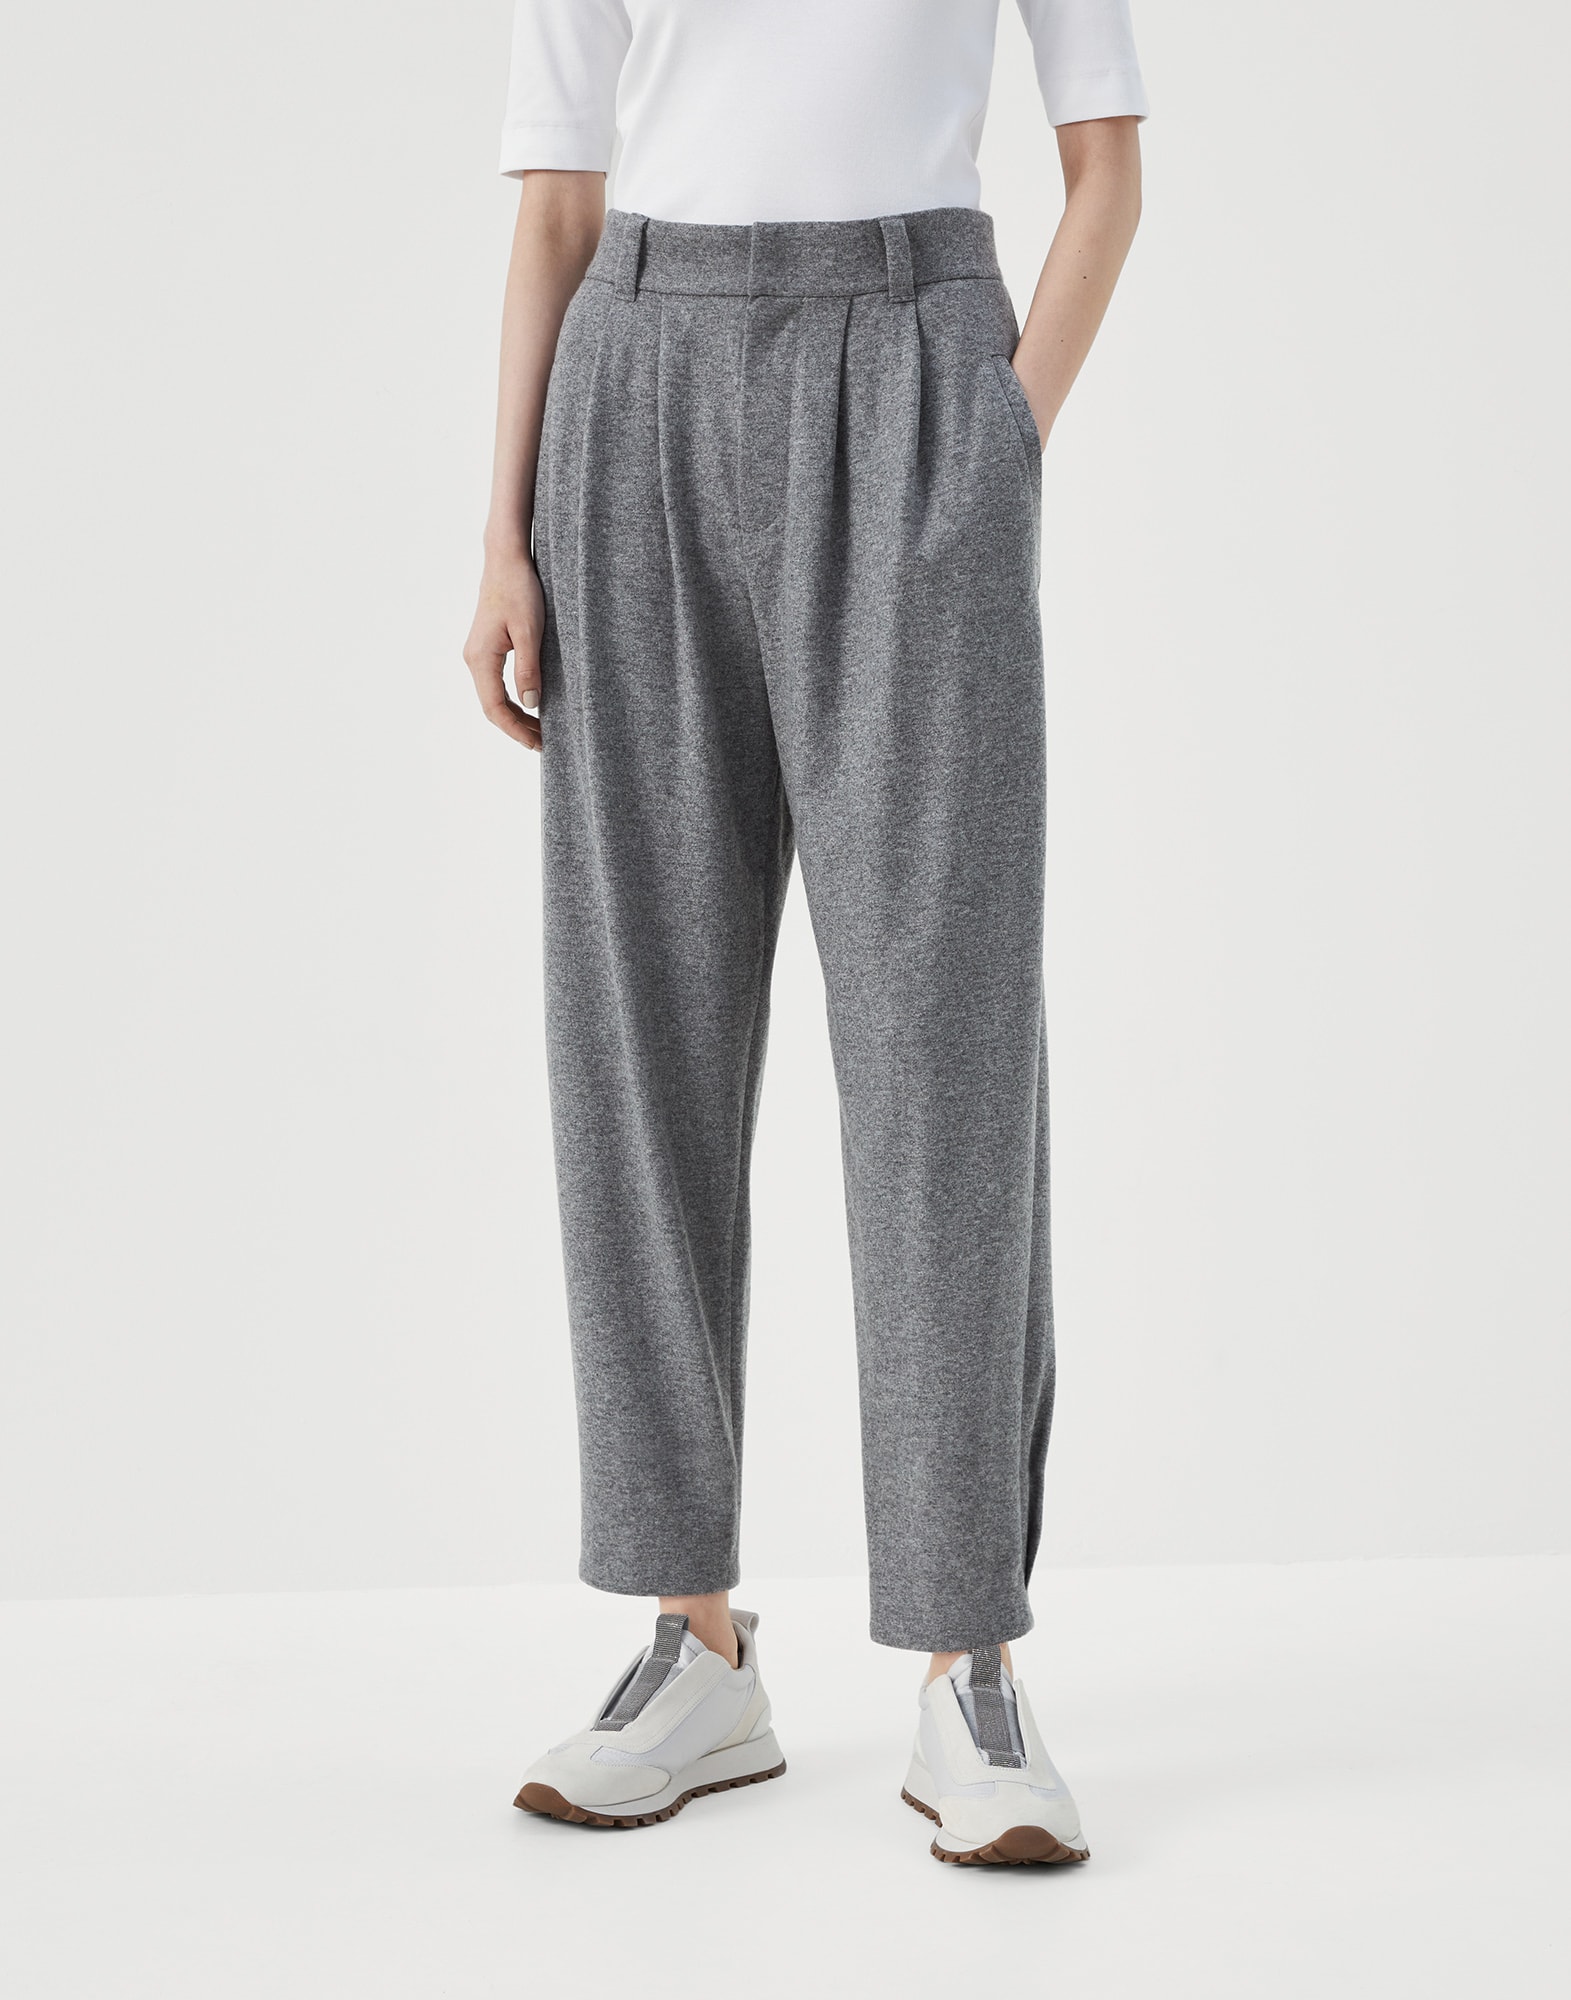 Cropped Carrot Trousers – 3.1 Phillip Lim